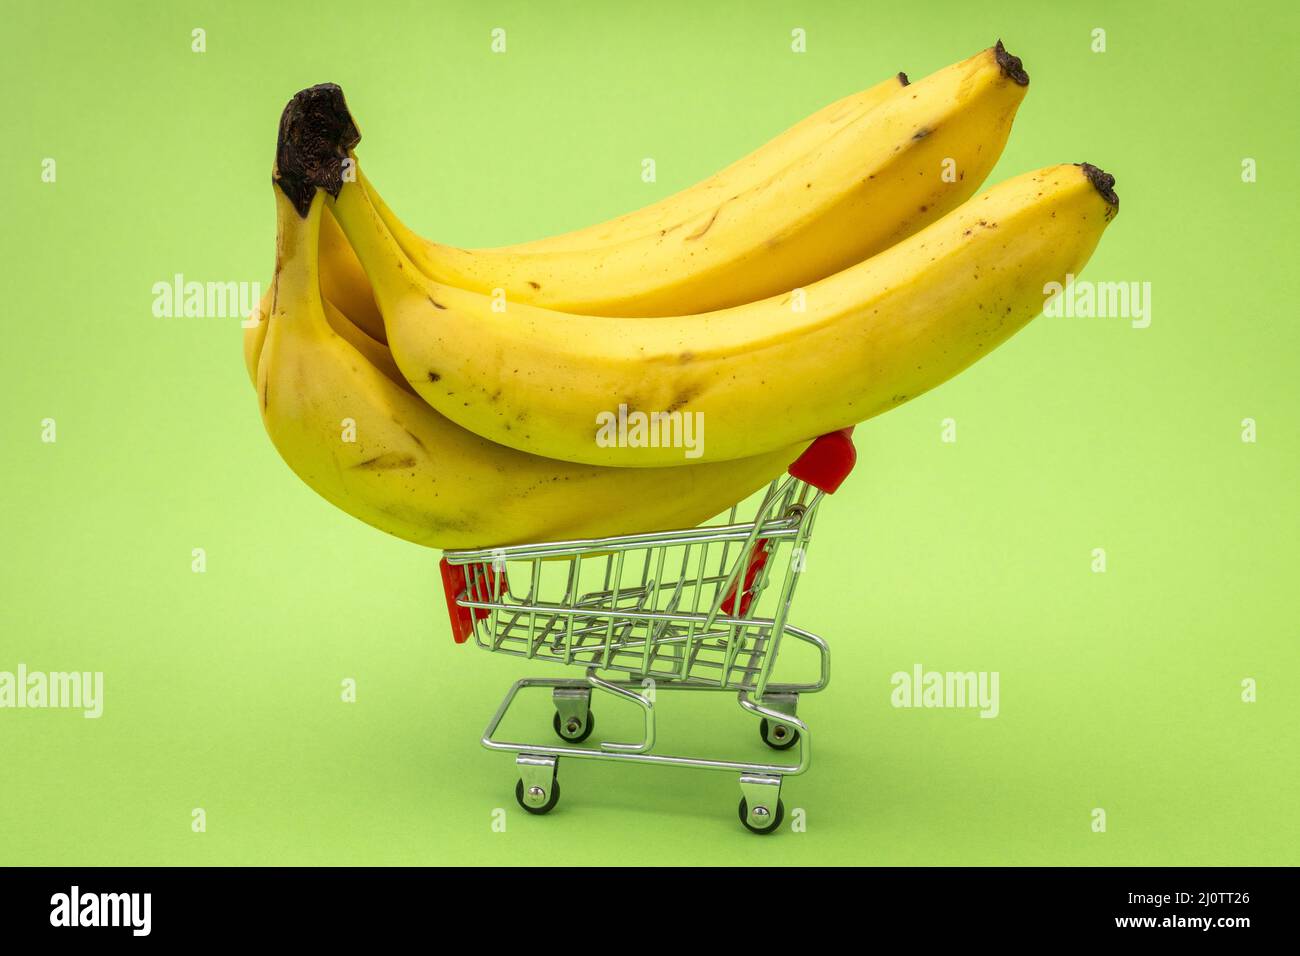 Shopping trolley full of bananas on green background Stock Photo - Alamy